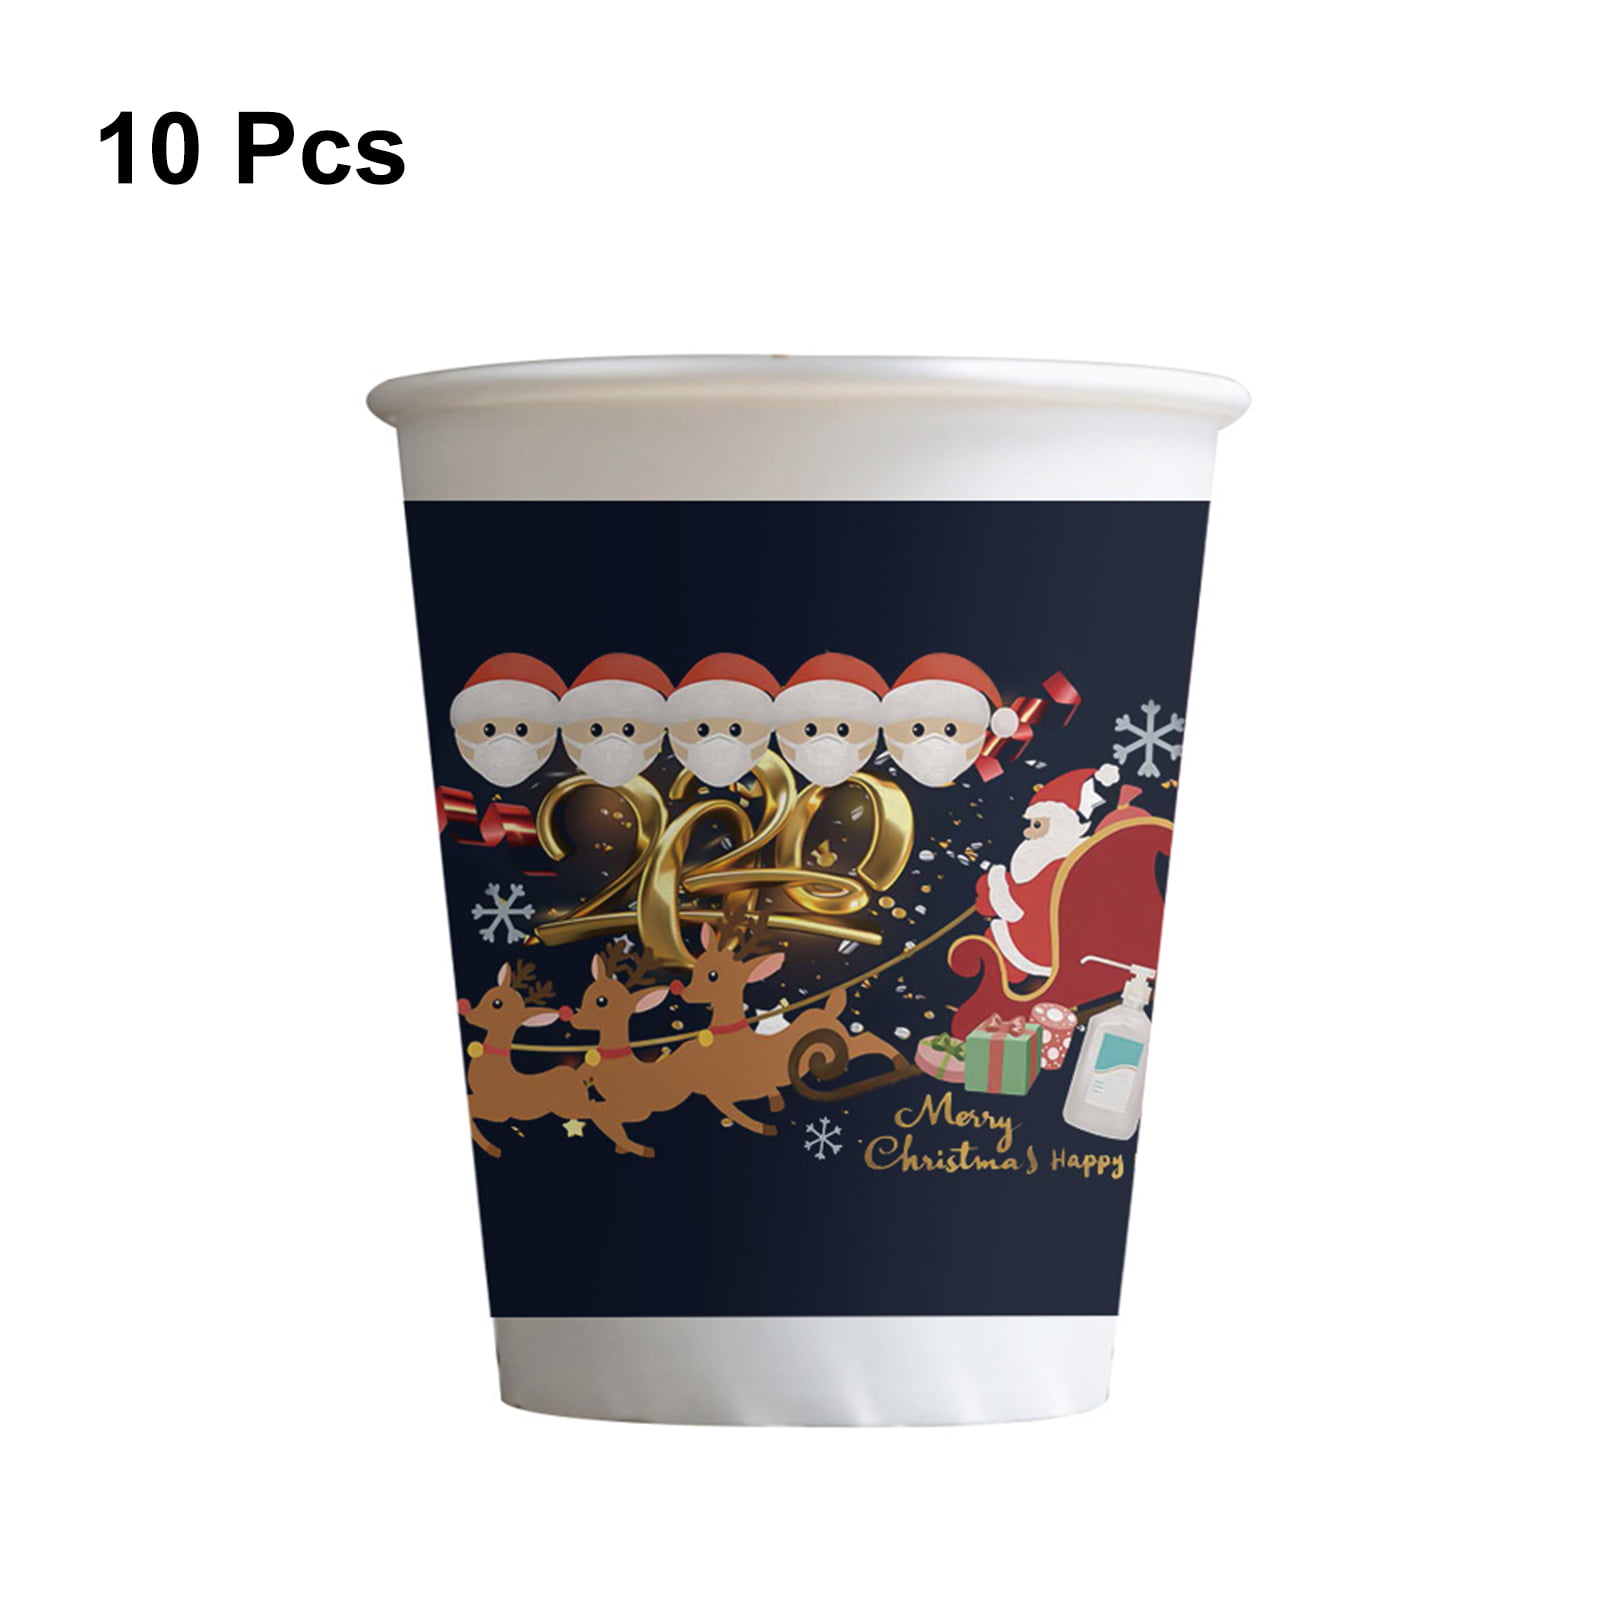 20 Cups Christmas Paper Cups Seasonal Santa Designs Adult Kids Disposable Xmas Party Cups for Coffee Christmas Drinkware Party Supplies Santa Decoration